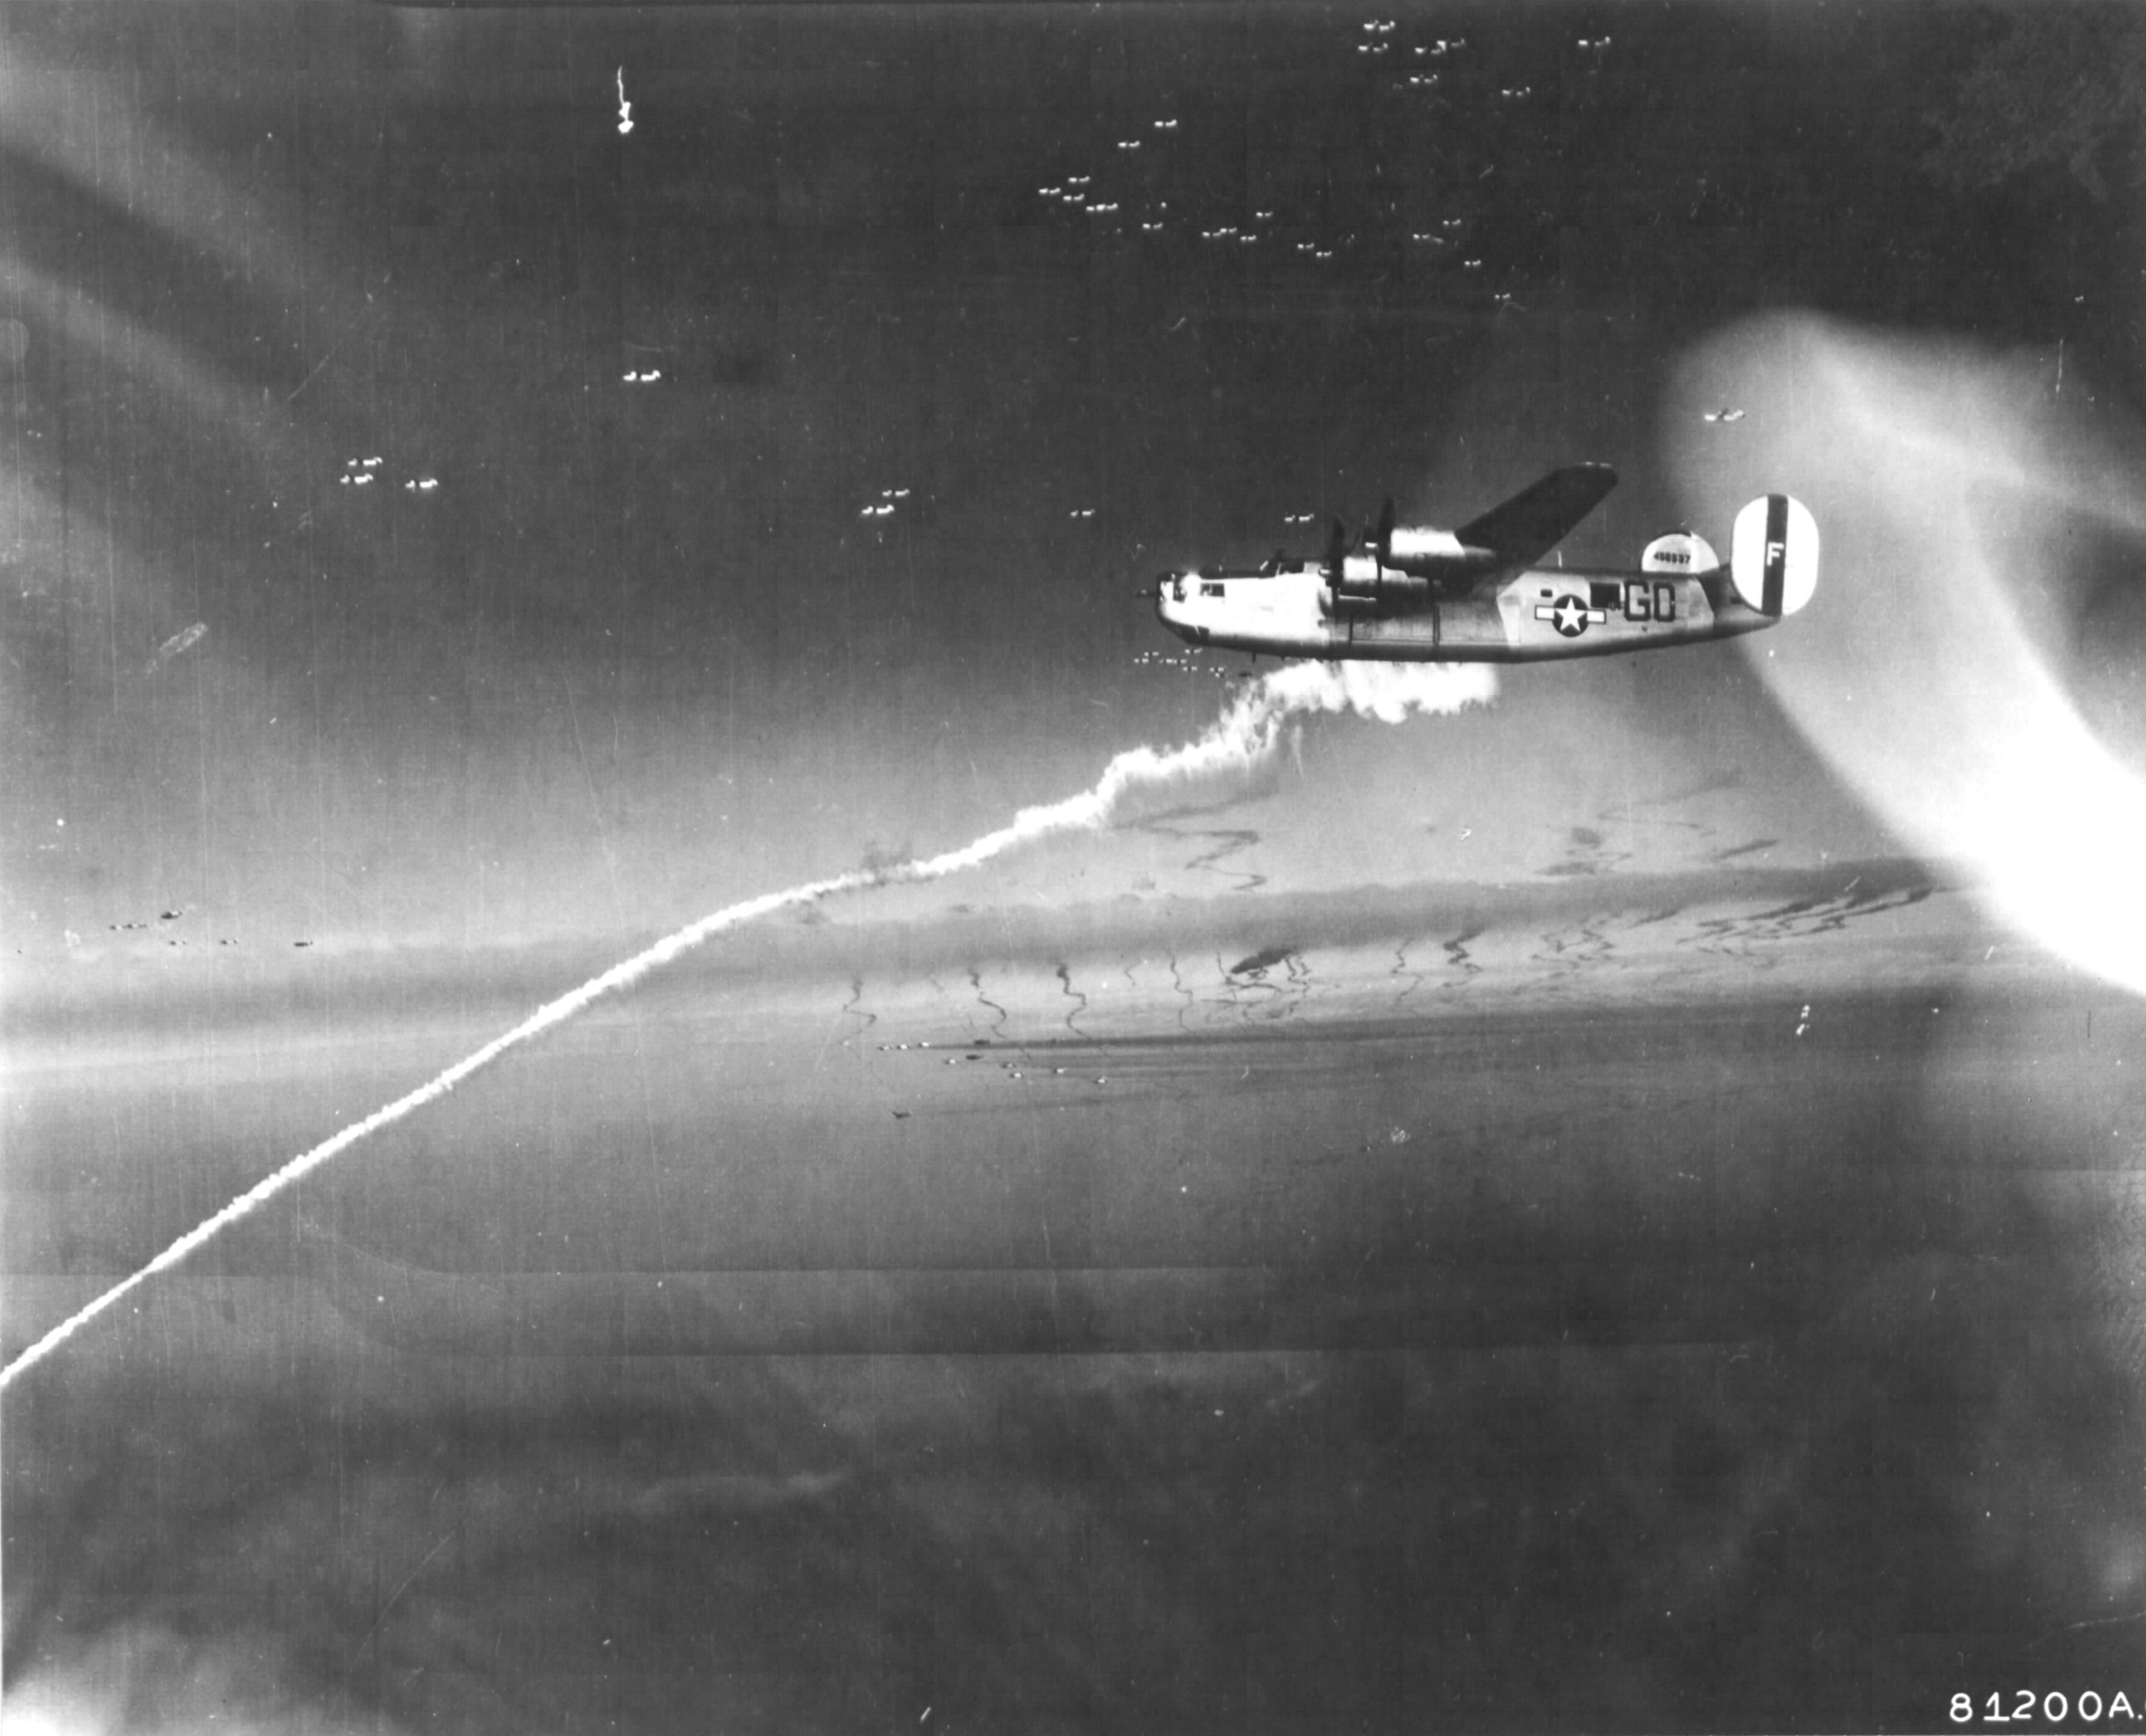 B-24M Liberator “Second Chance II” of US 8th Air Force, 93rd BG, over Zossen, Germany, Mar 15 1945 (US National Archives)